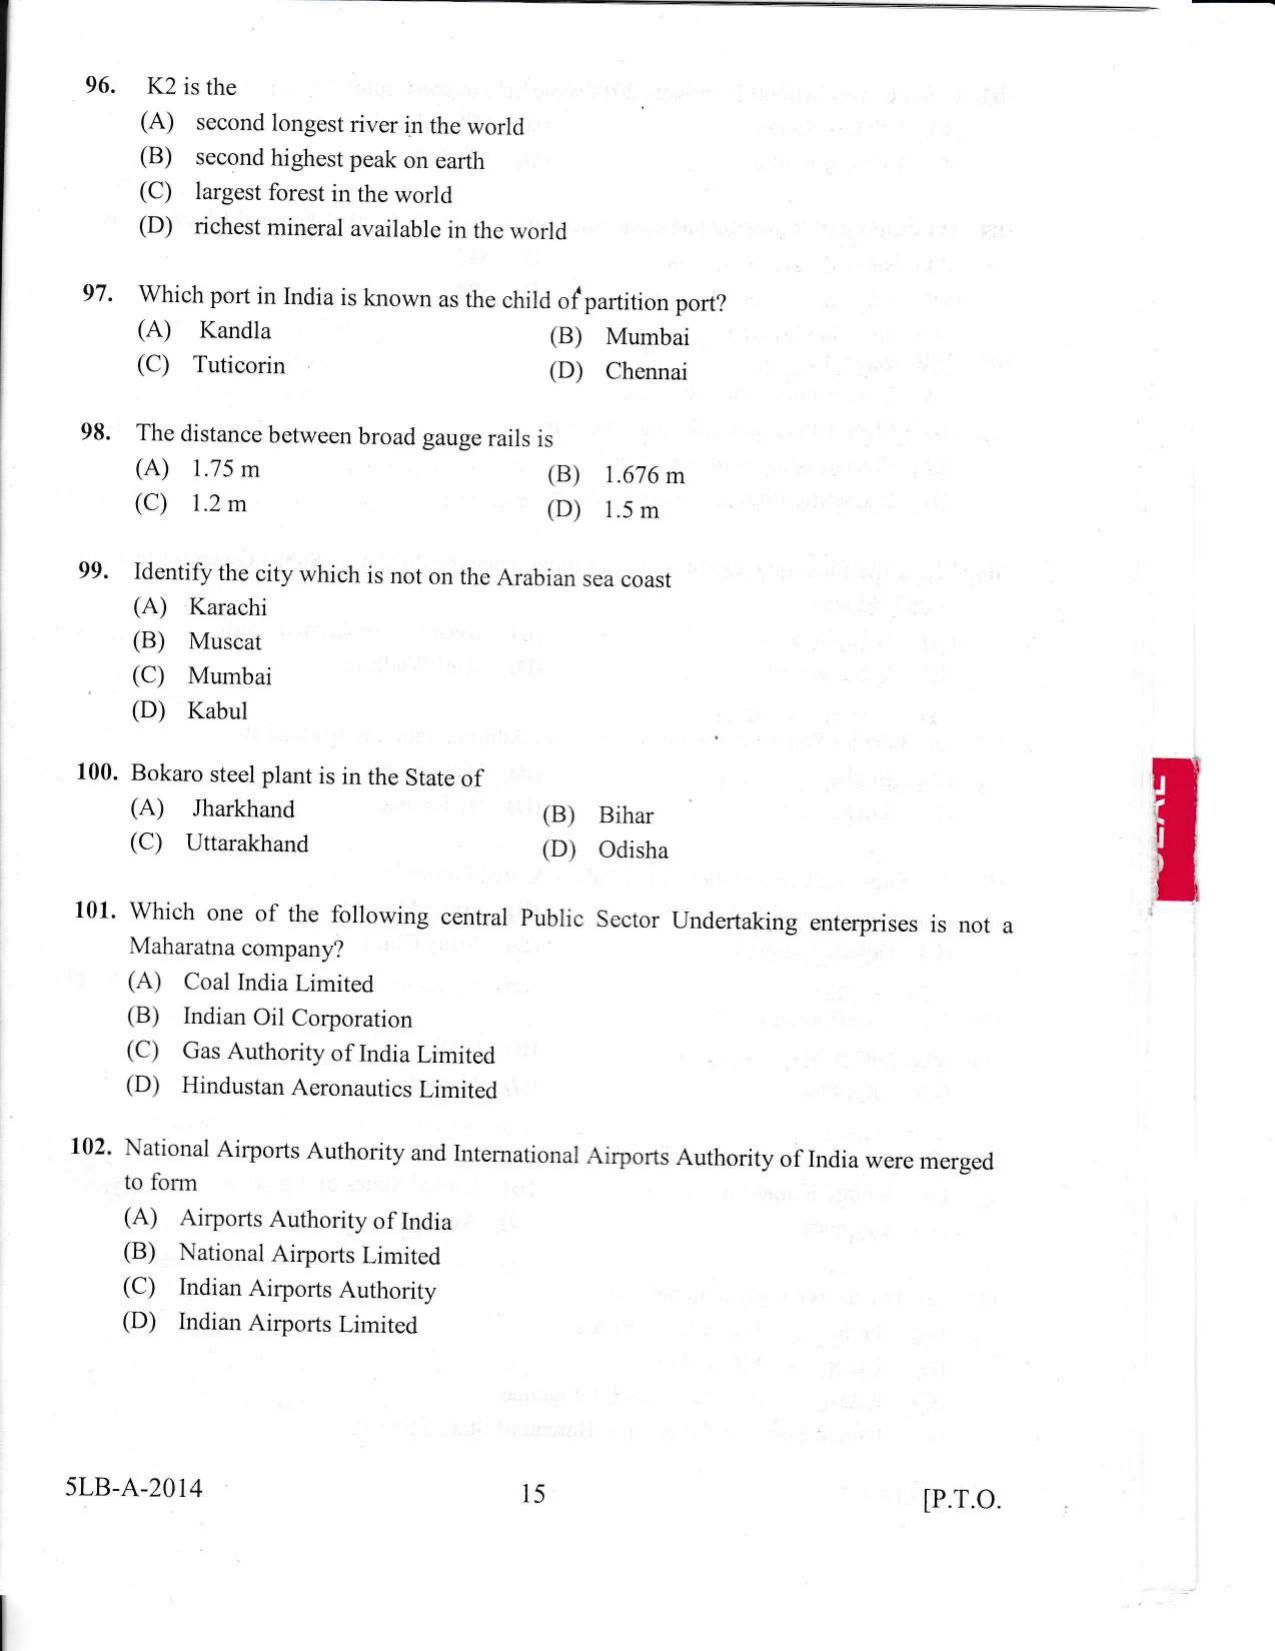 KLEE 5 Year LLB Exam 2014 Question Paper - Page 15